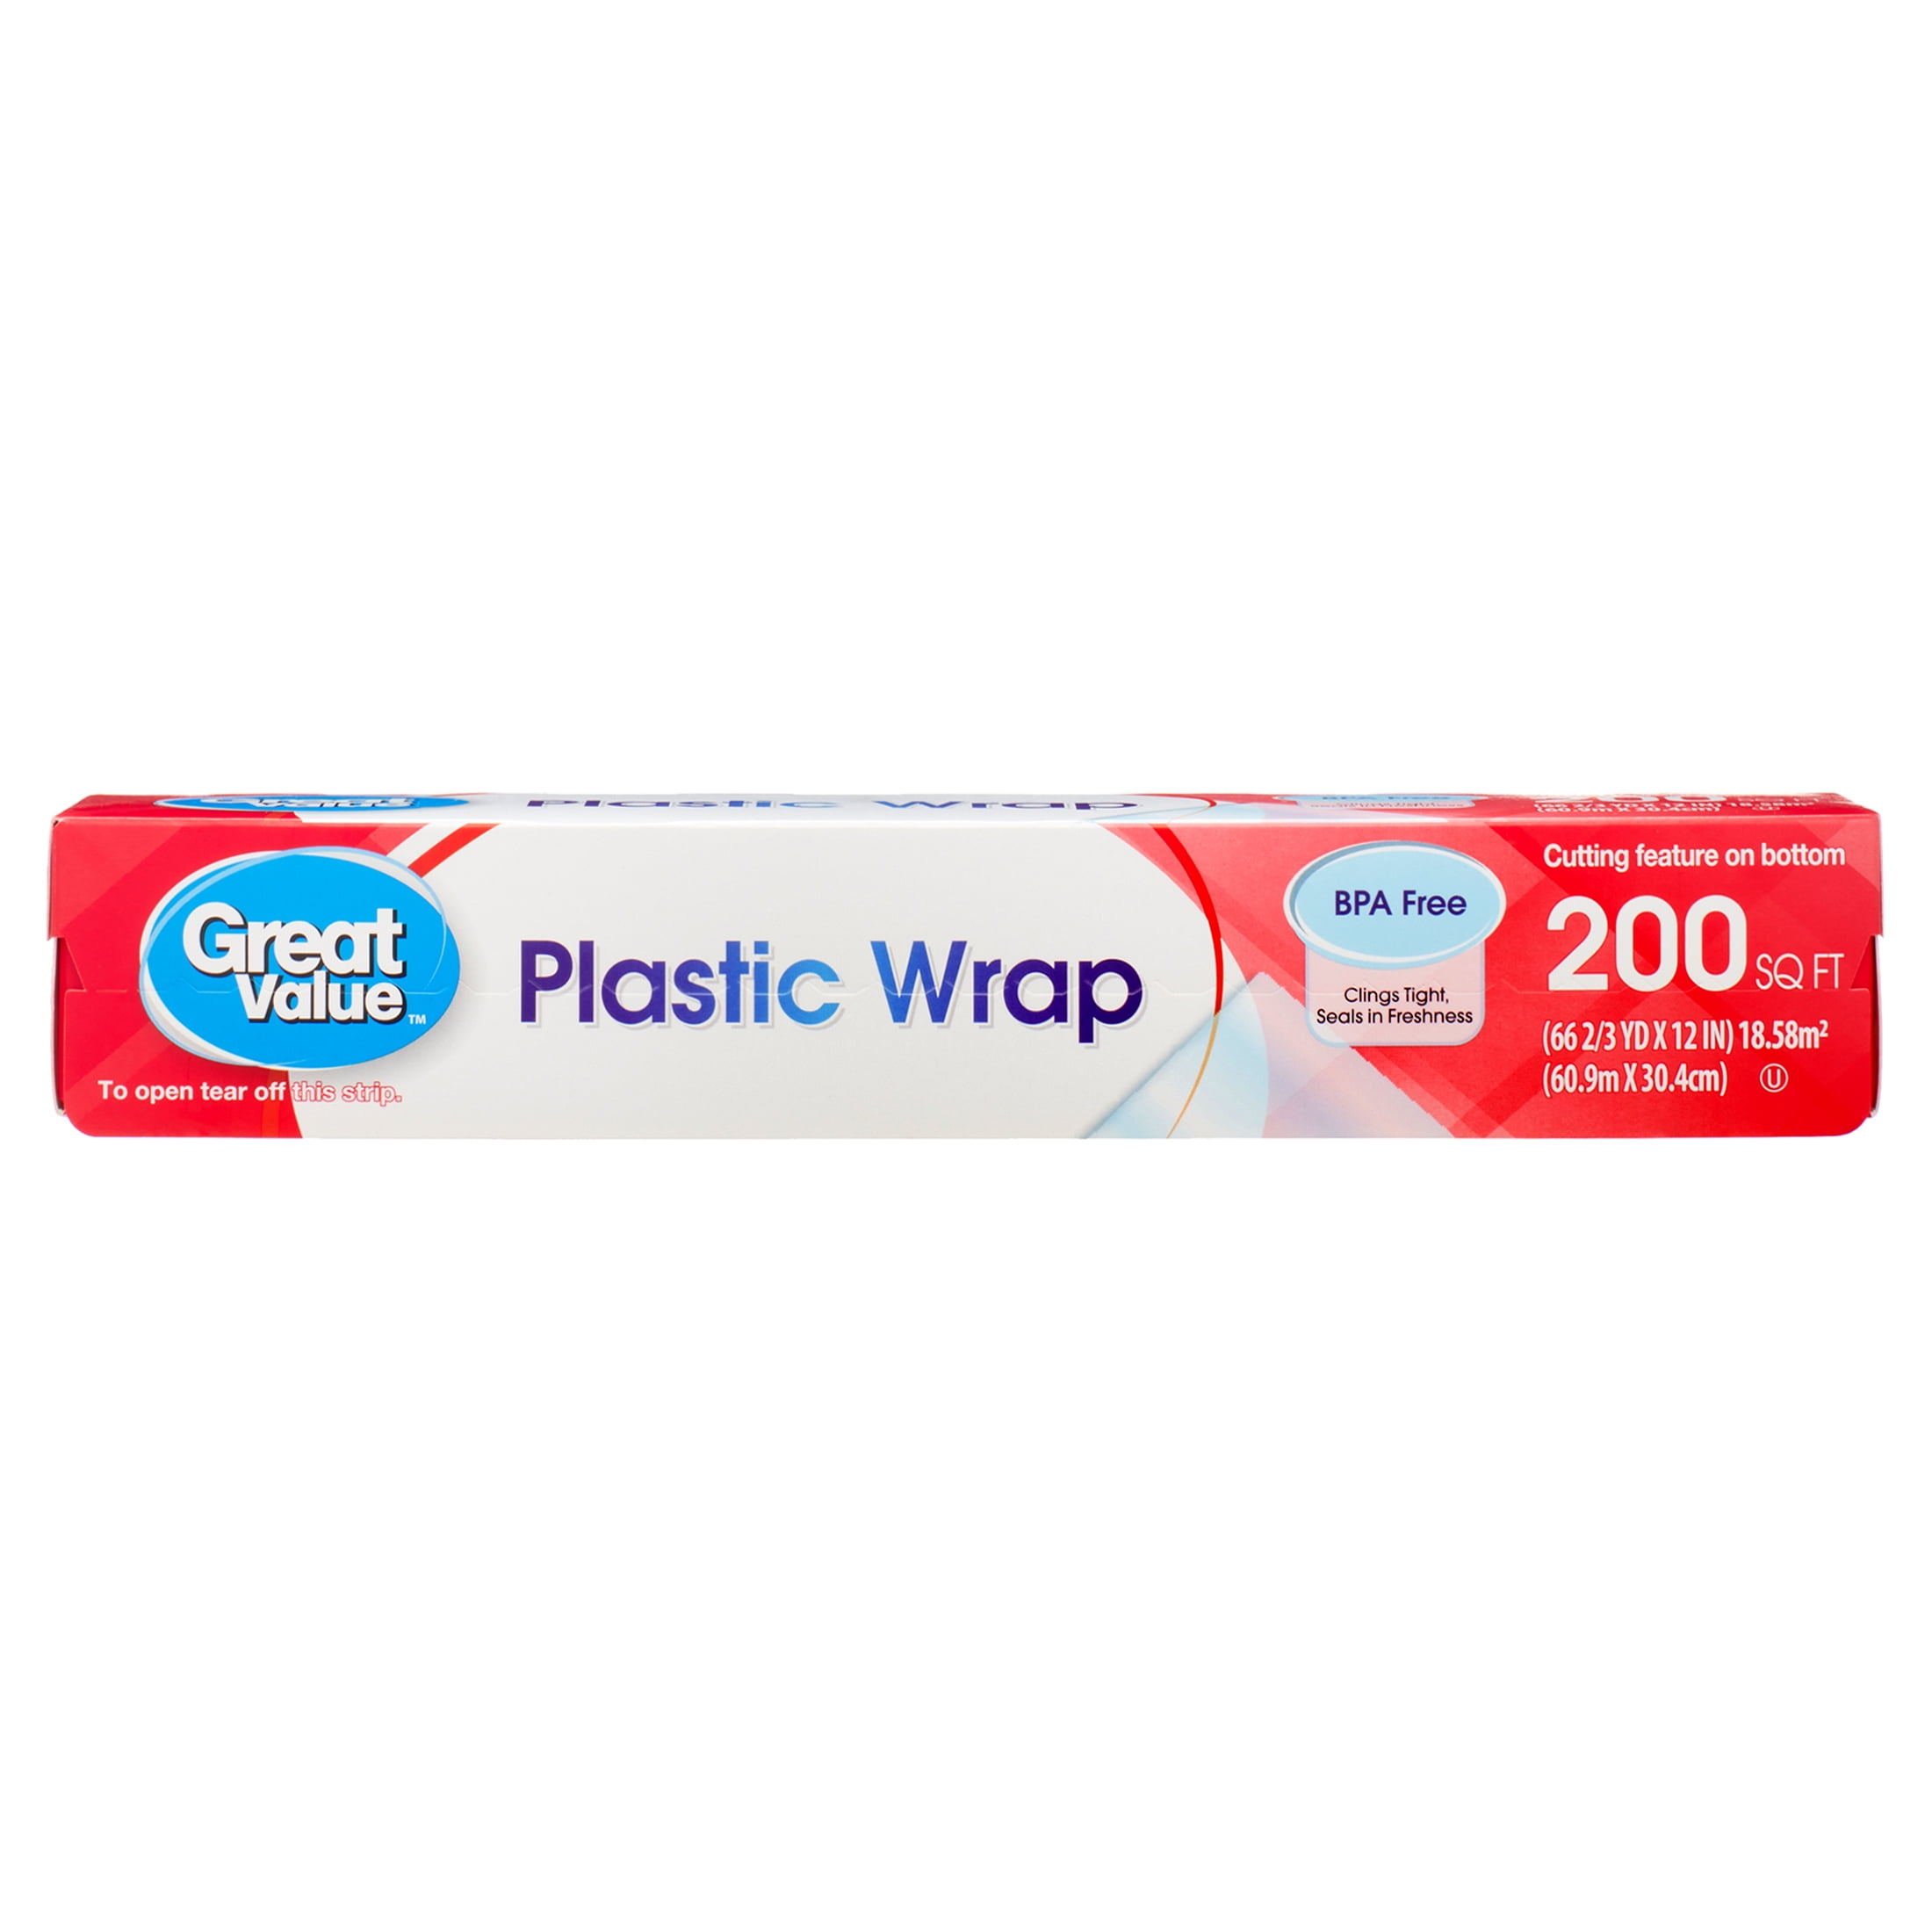 1 Count Saran Wrap Cling Plus Wrap 200 Square Foot Boxed 